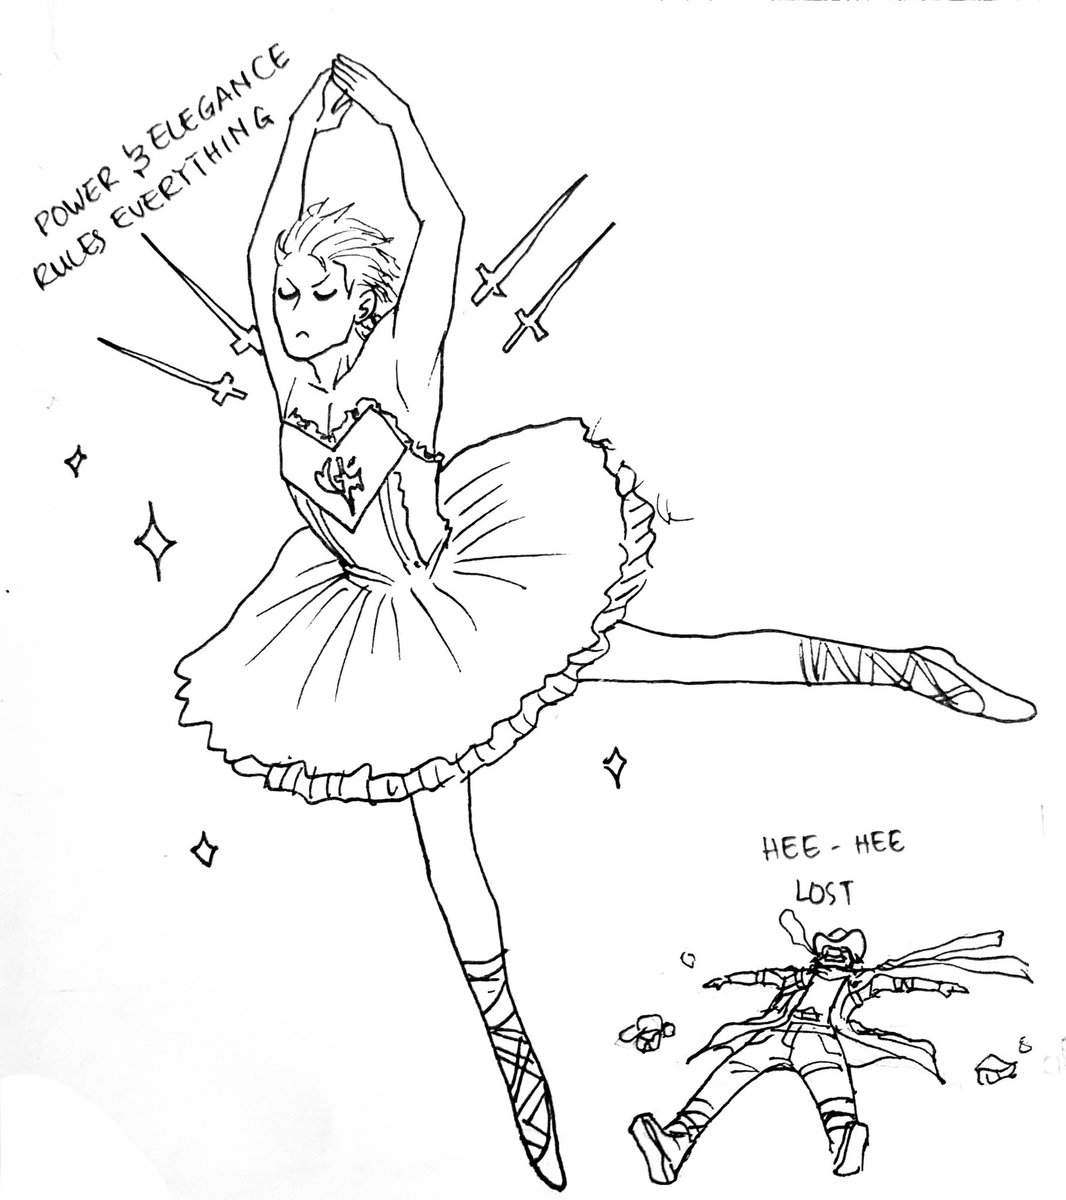 @MatosauceB3 AHAHAHA ME TOO, lets talk more here!! Please accept a balerina vergil for my gratitute 